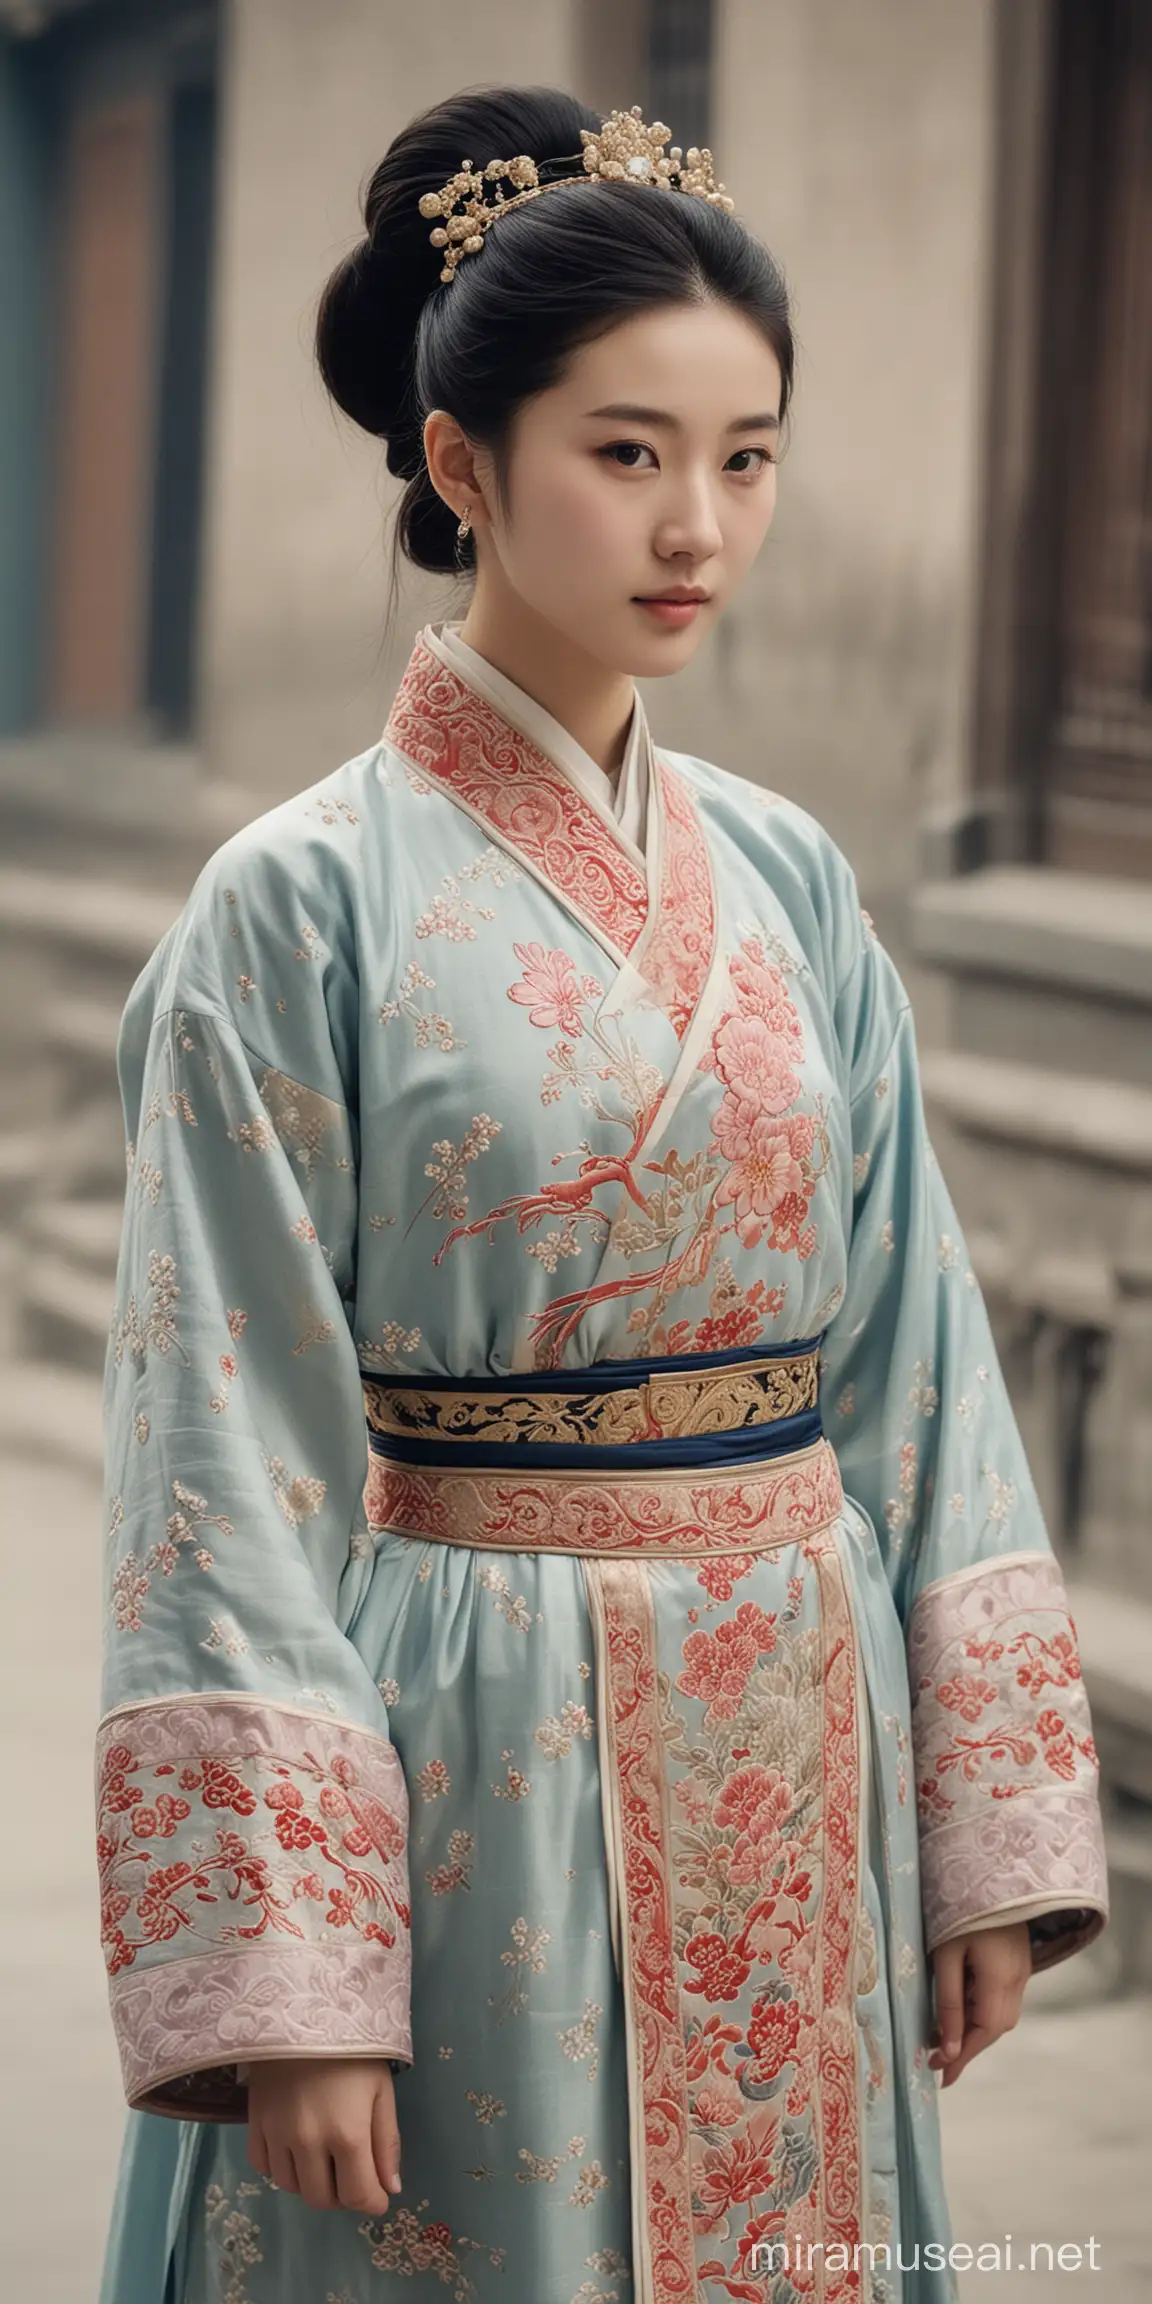 Young Woman in Qing Dynasty Clothing on Qing Dynasty Streets